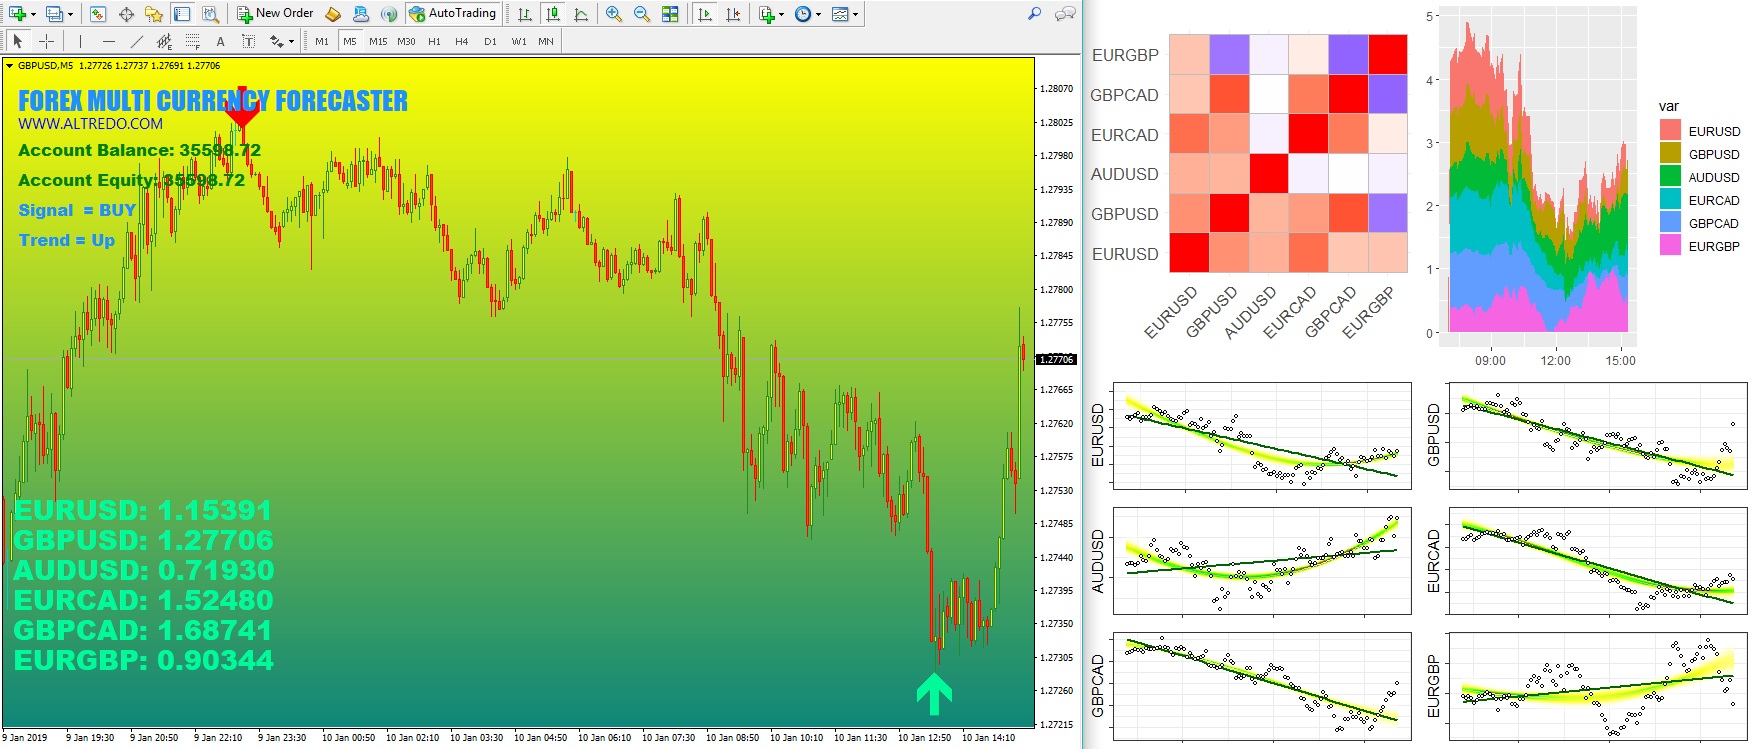 Forex Multi Currency Forecaster Indicator